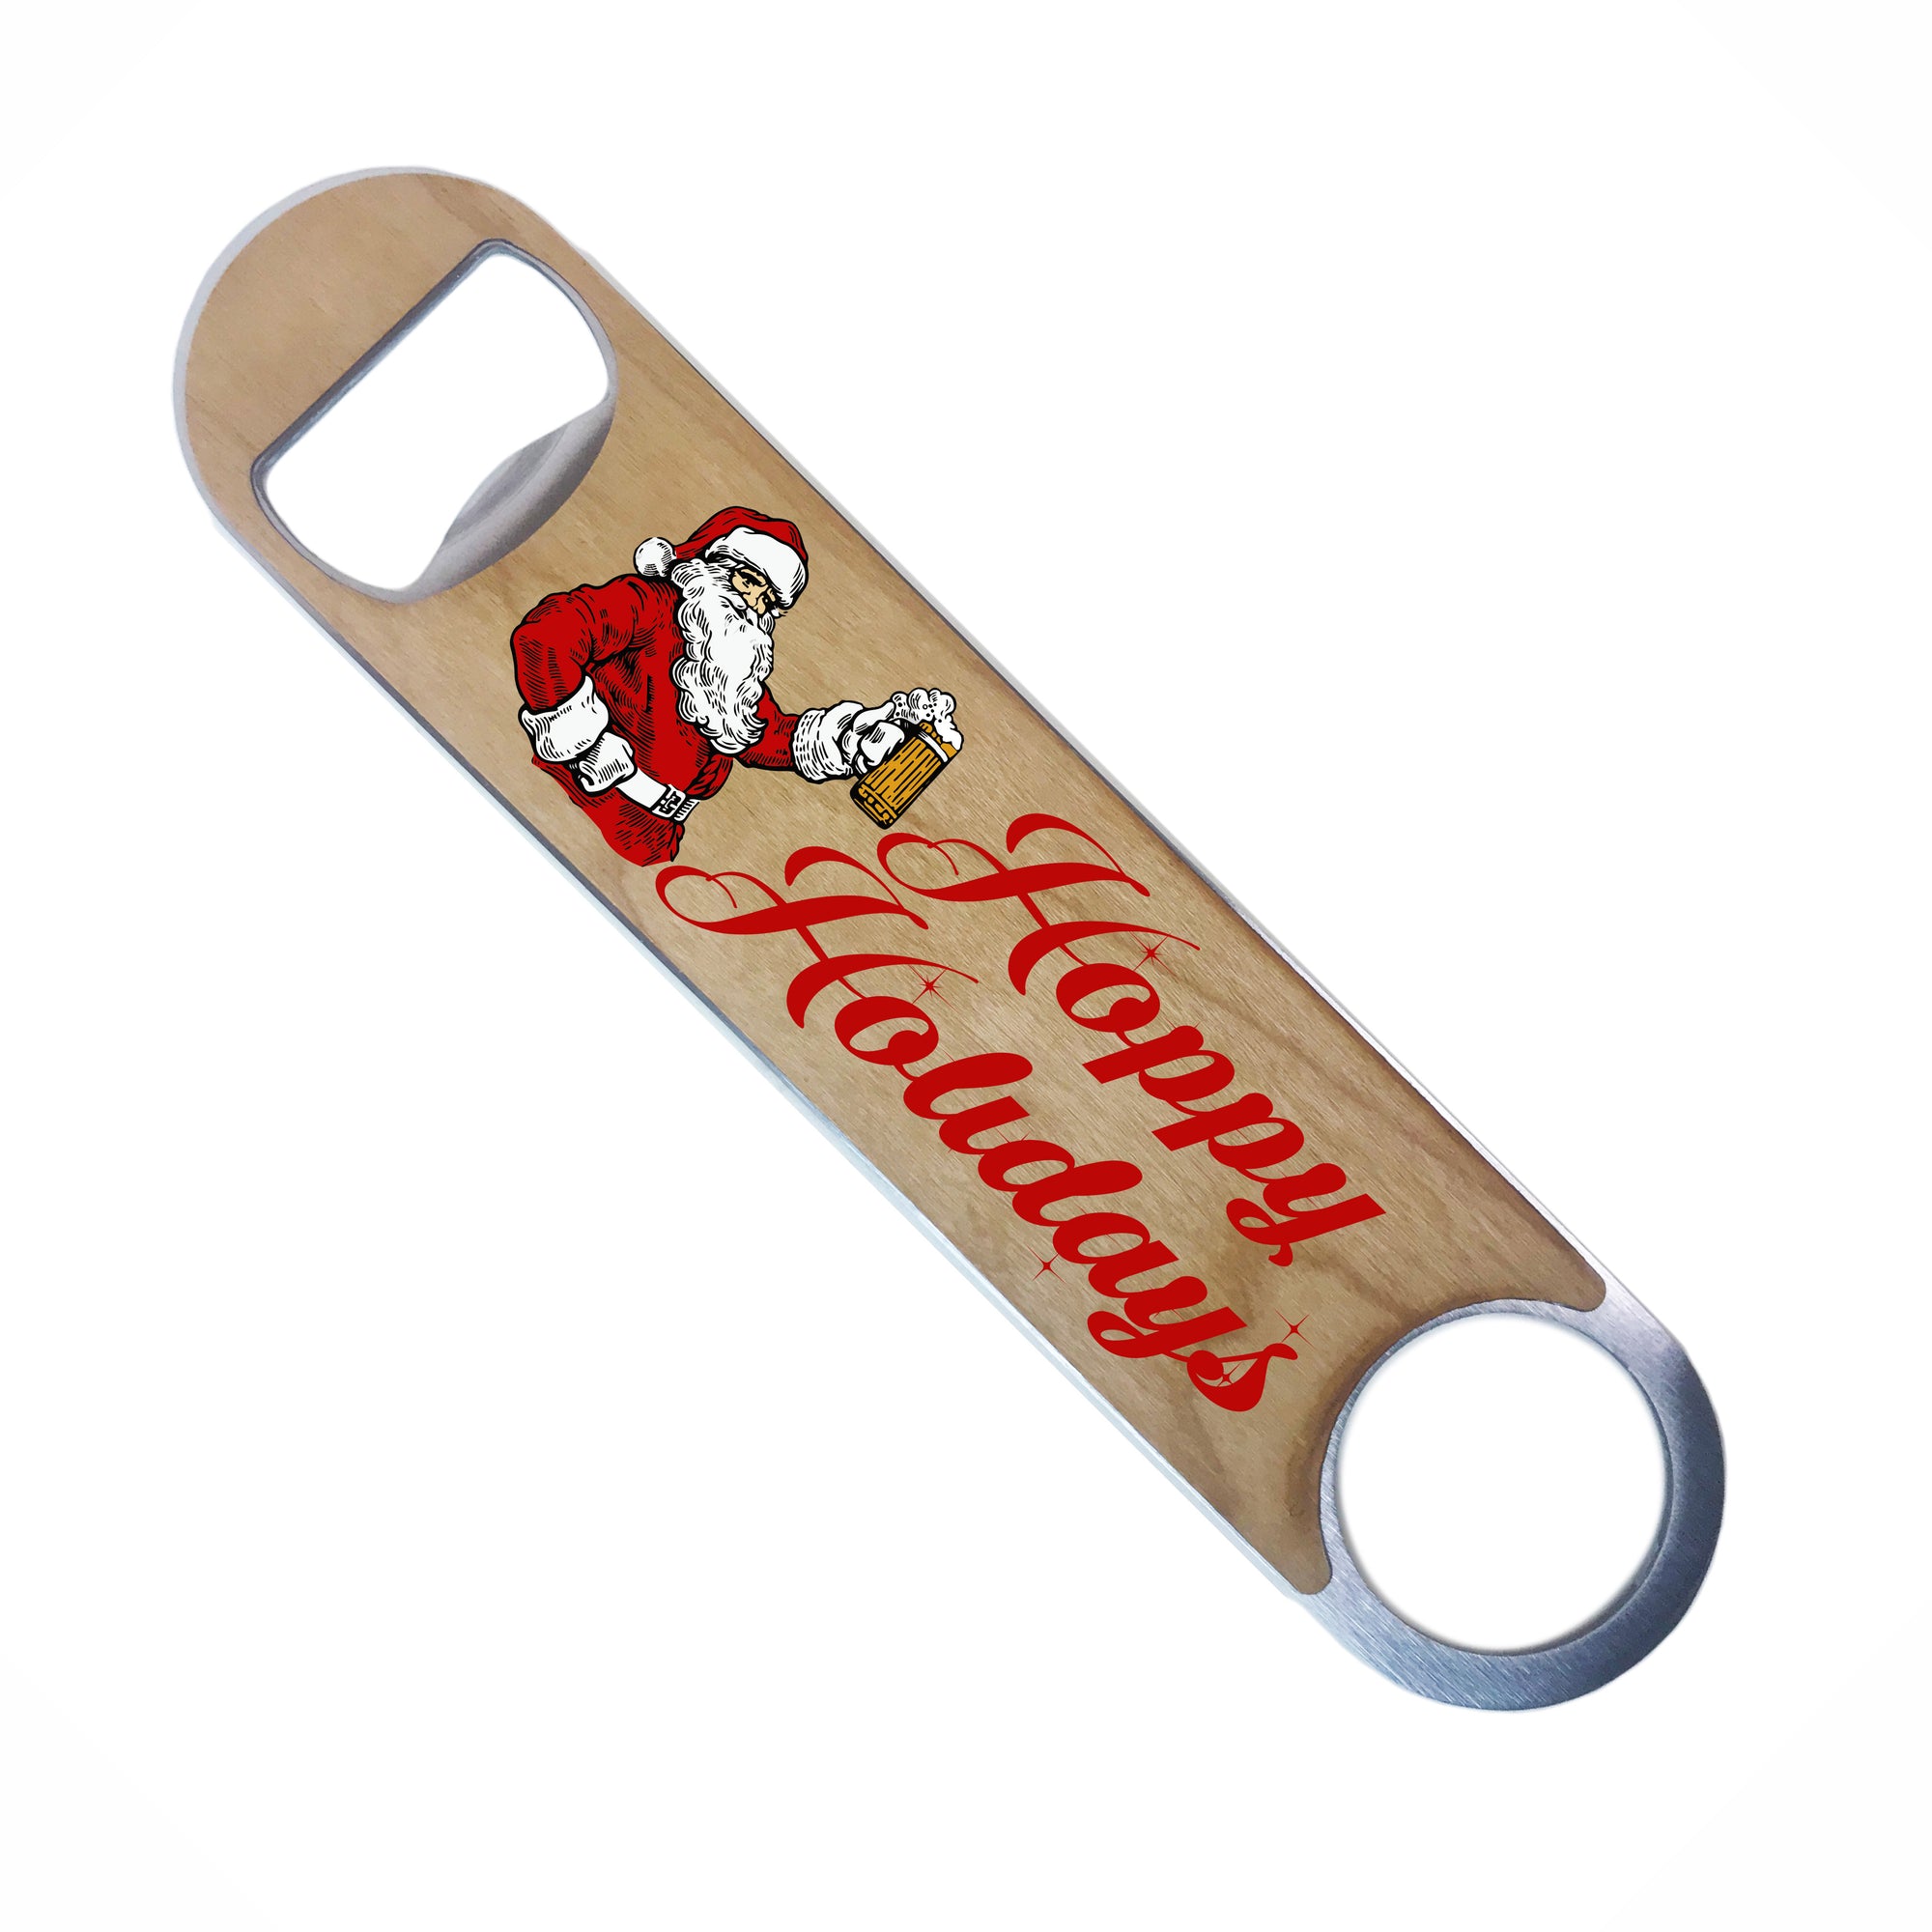 Hoppy Holidays Speed Bottle Openers - 3 Designs Available